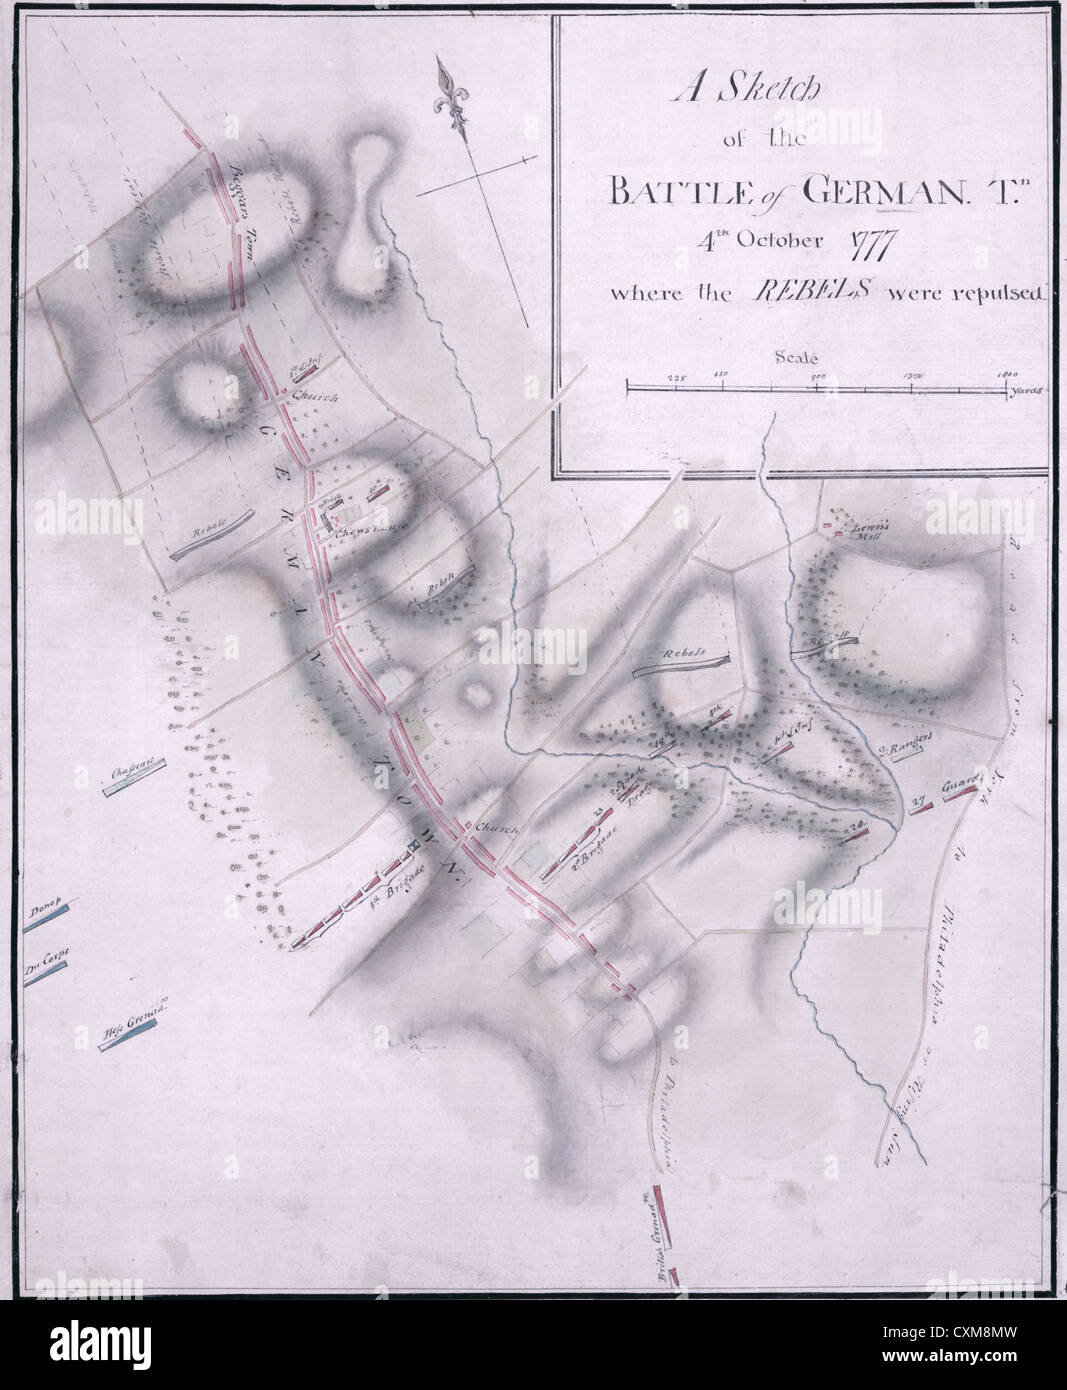 MAP  A Sketch of the Battle of Germantown, 4th October 1777, where the rebels were repulsed. USA Revolutionary War Stock Photo